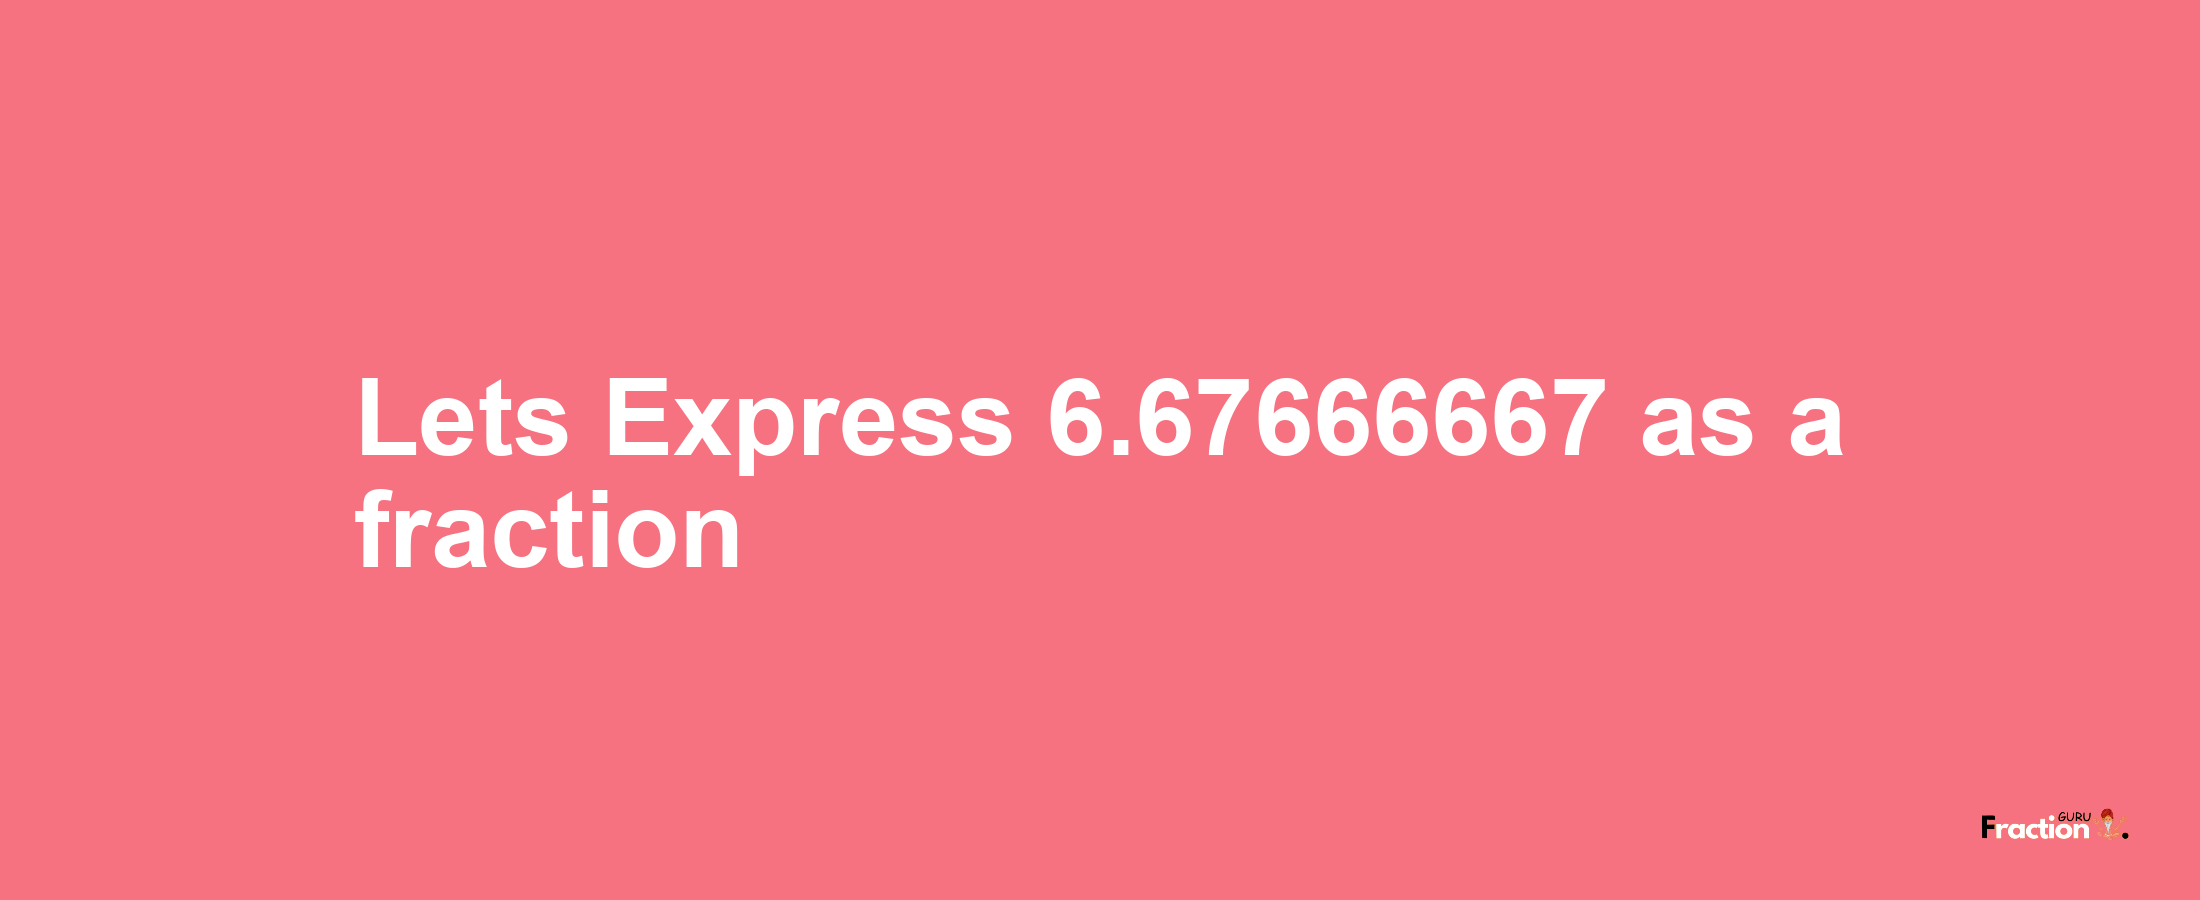 Lets Express 6.67666667 as afraction